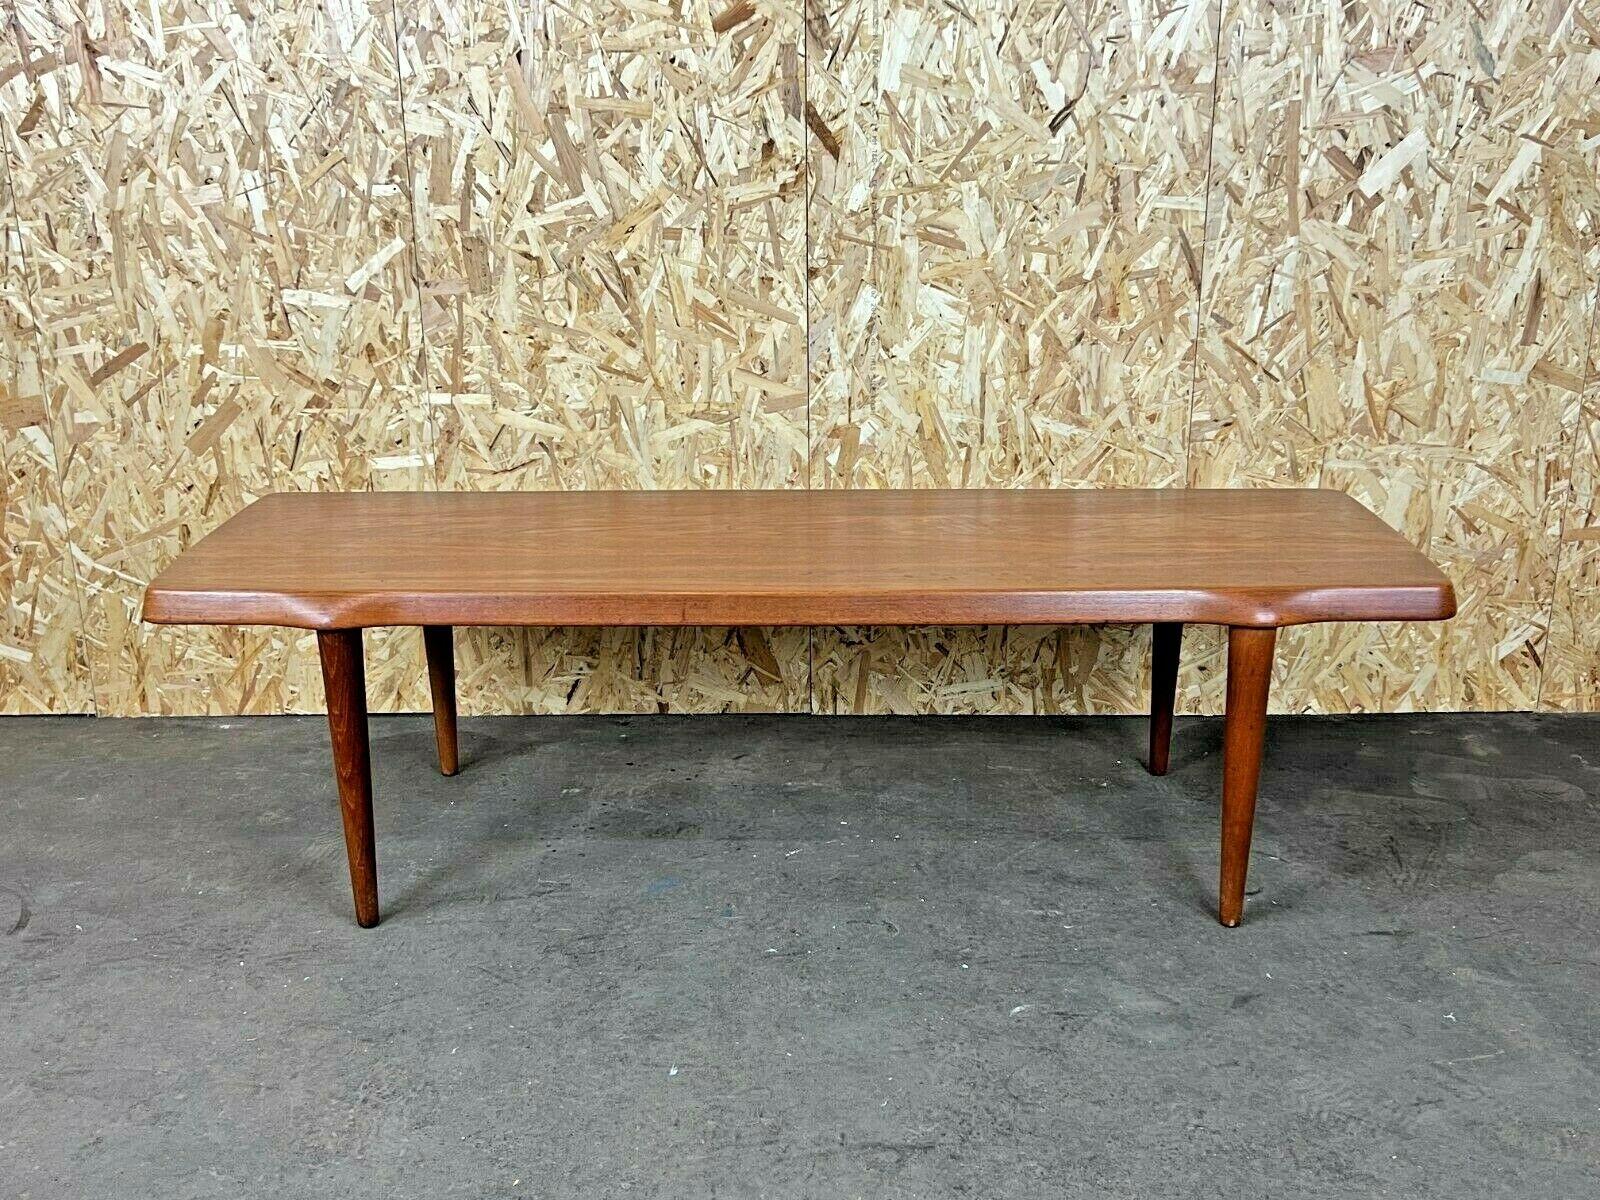 60s 70s teak table coffee table coffee table John Boné Mikael Laursen 60s

Object: coffee table

Manufacturer: John Boné / Mikael Laursen

Condition: good

Age: around 1960-1970

Dimensions:

166.5cm x 54cm x 47.5cm

Other